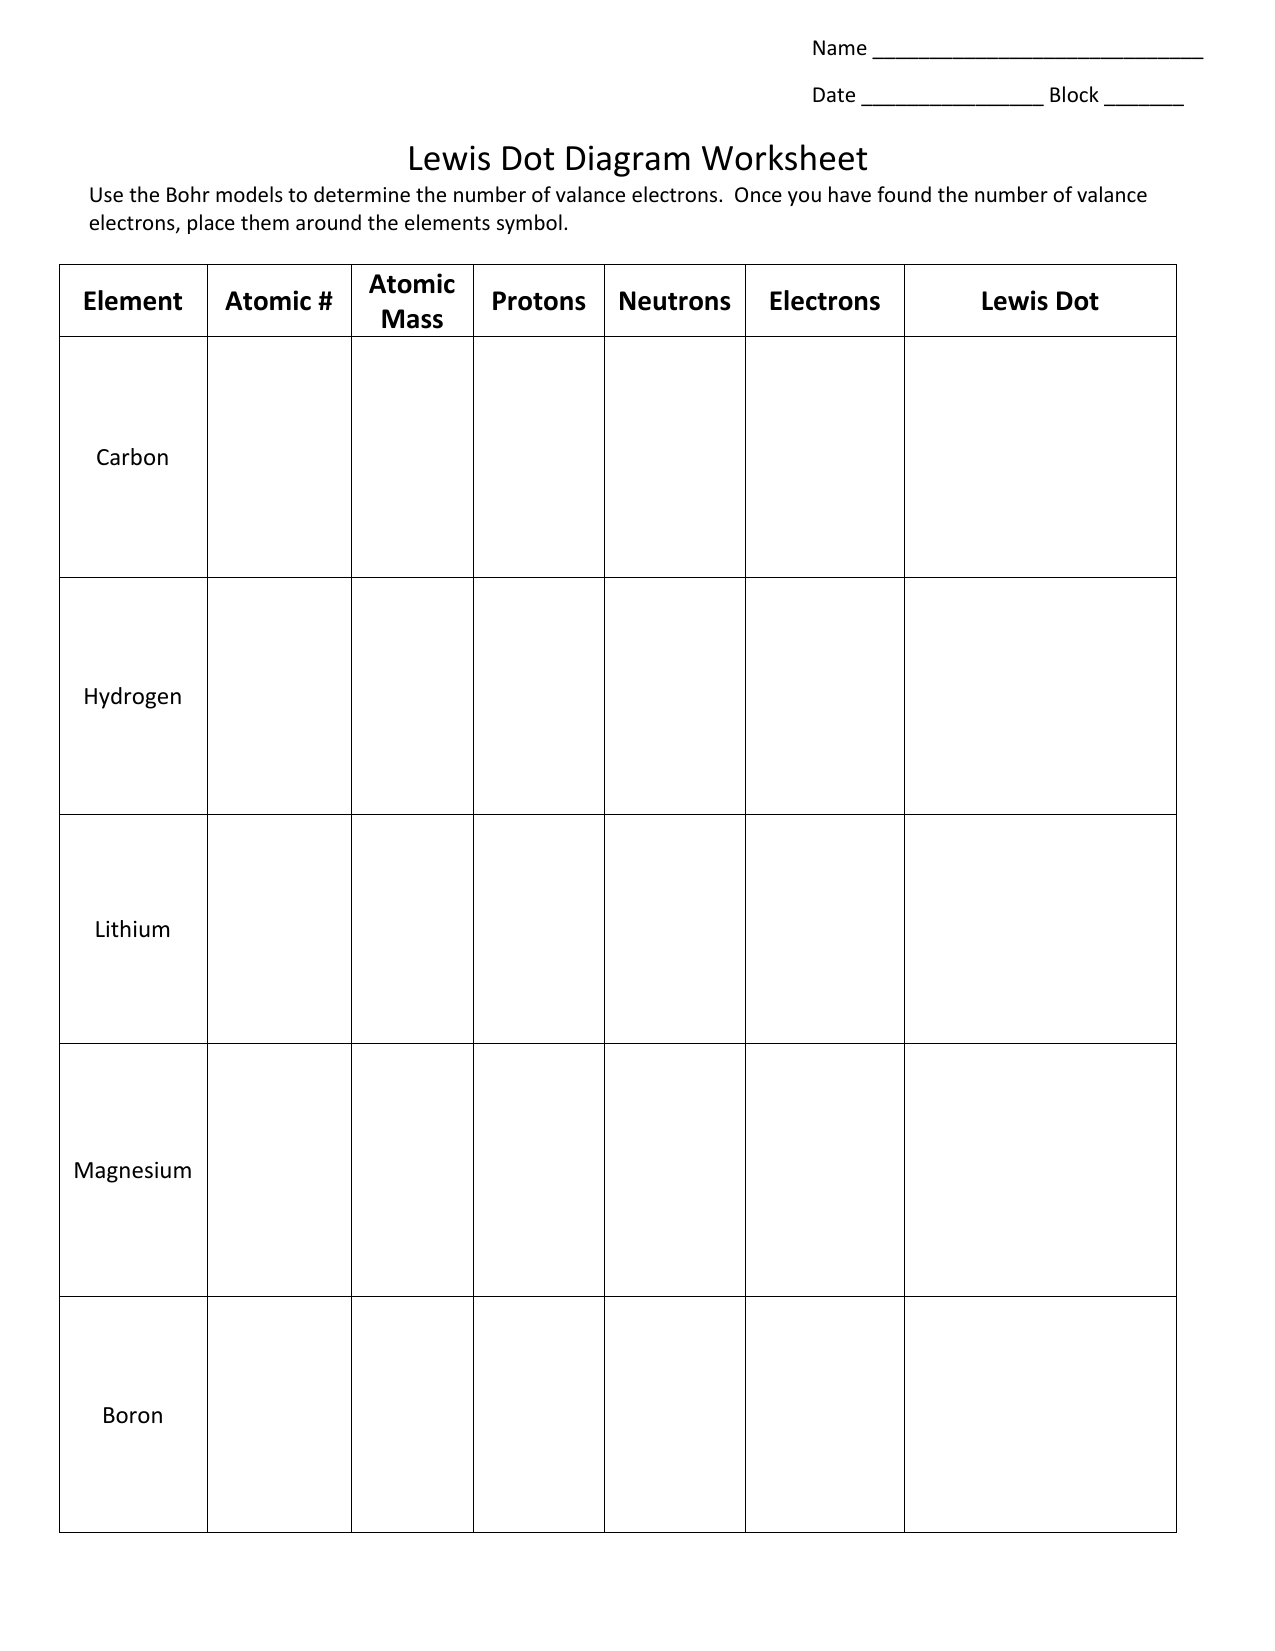 Lewis-dot-diagram-worksheet - with answers Within Lewis Dot Diagrams Worksheet Answers